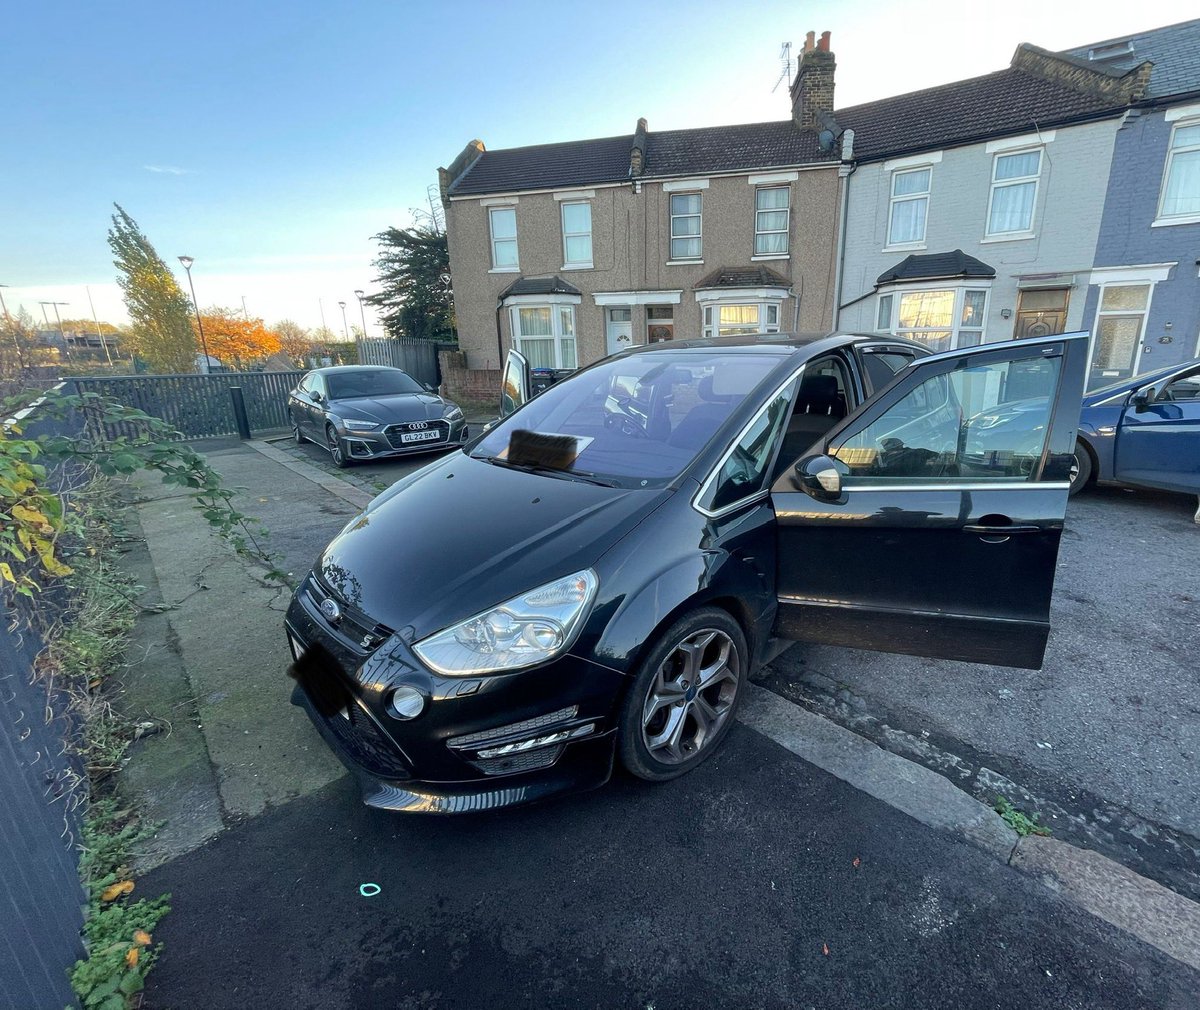 NA STT have recovered another stolen vehicle being a Ford Galaxy this week on Operation Poethlyn. Vehicle worth over £30k found, seized and recovered! #OpPoethlyn @MPSEnfield